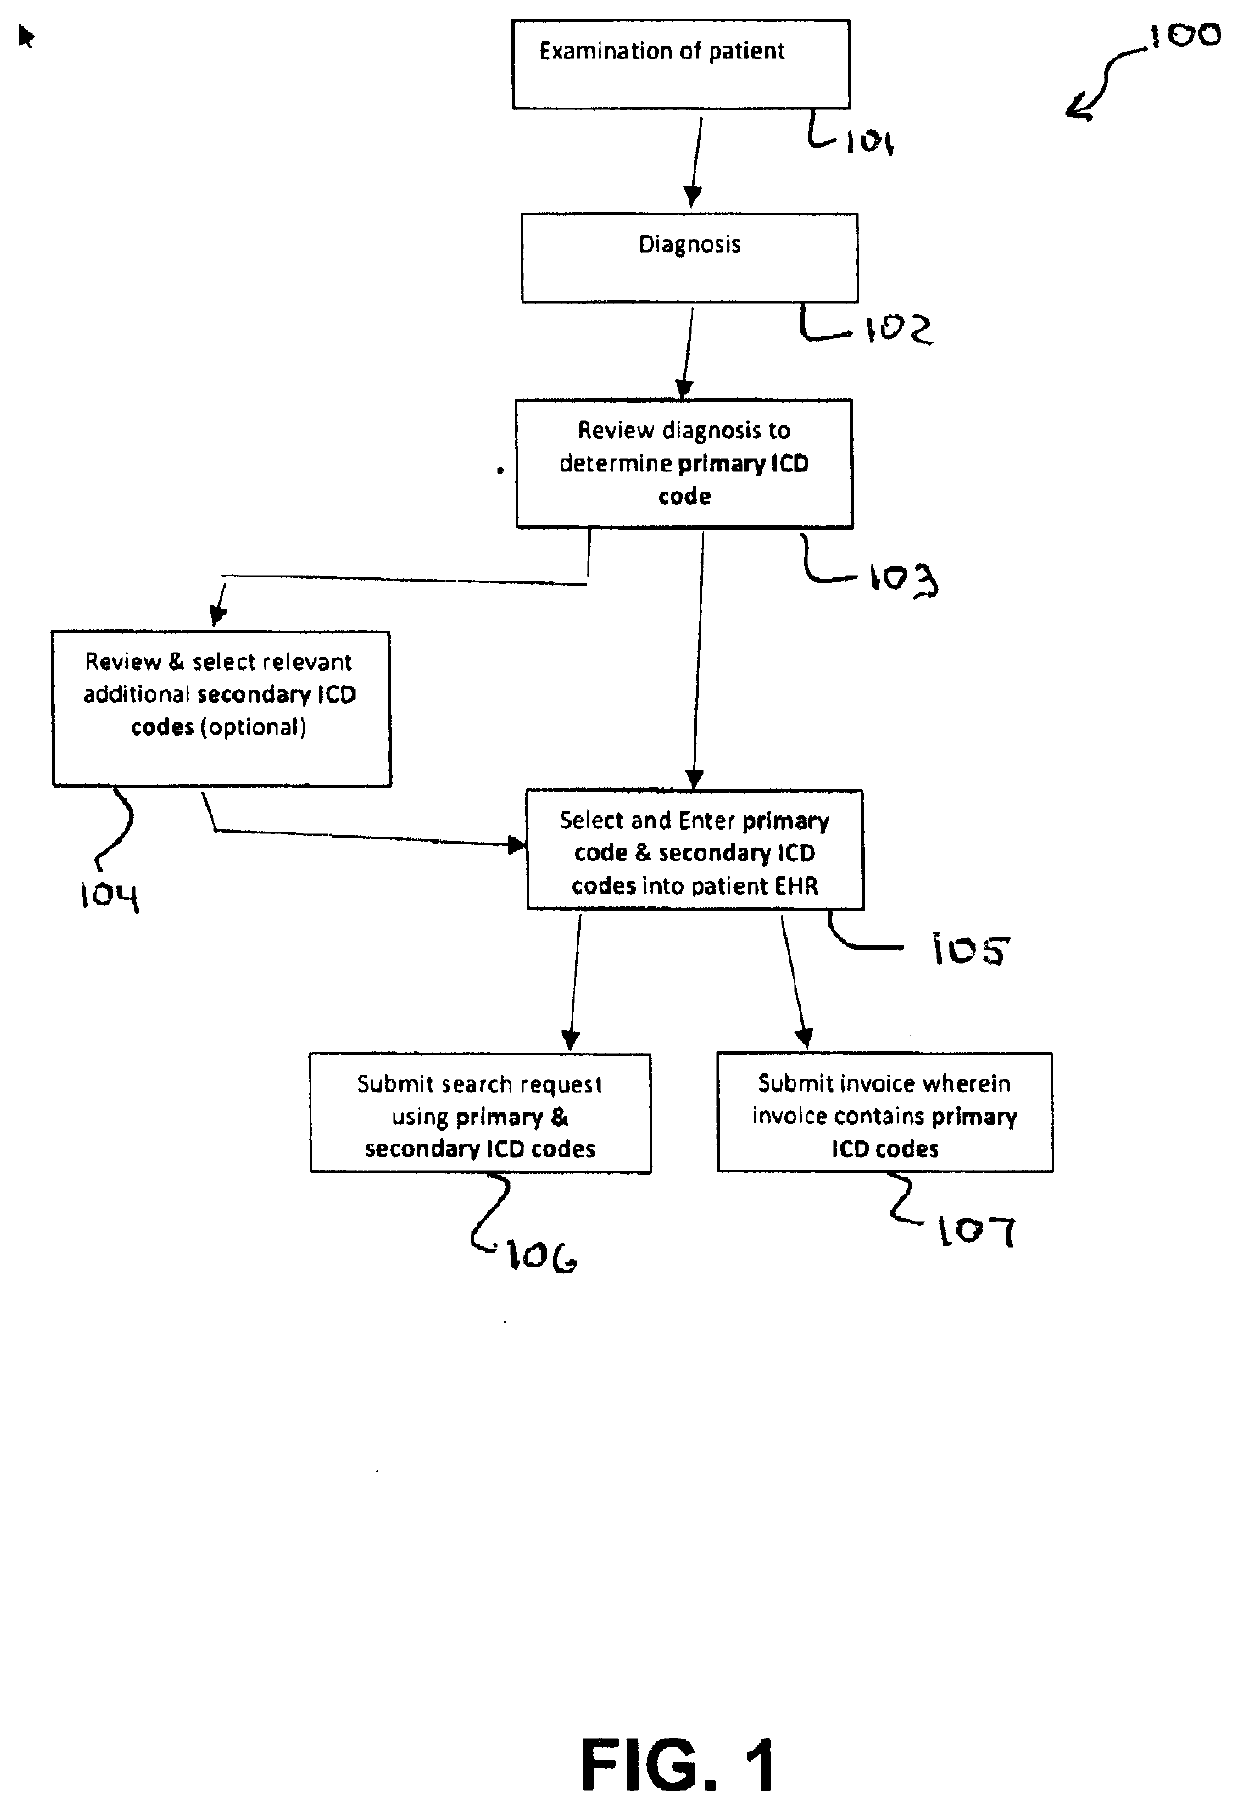 Diagnositic and treatmetnt tool and method for electronic recording and indexing patient encounters for allowing instant search of patient history